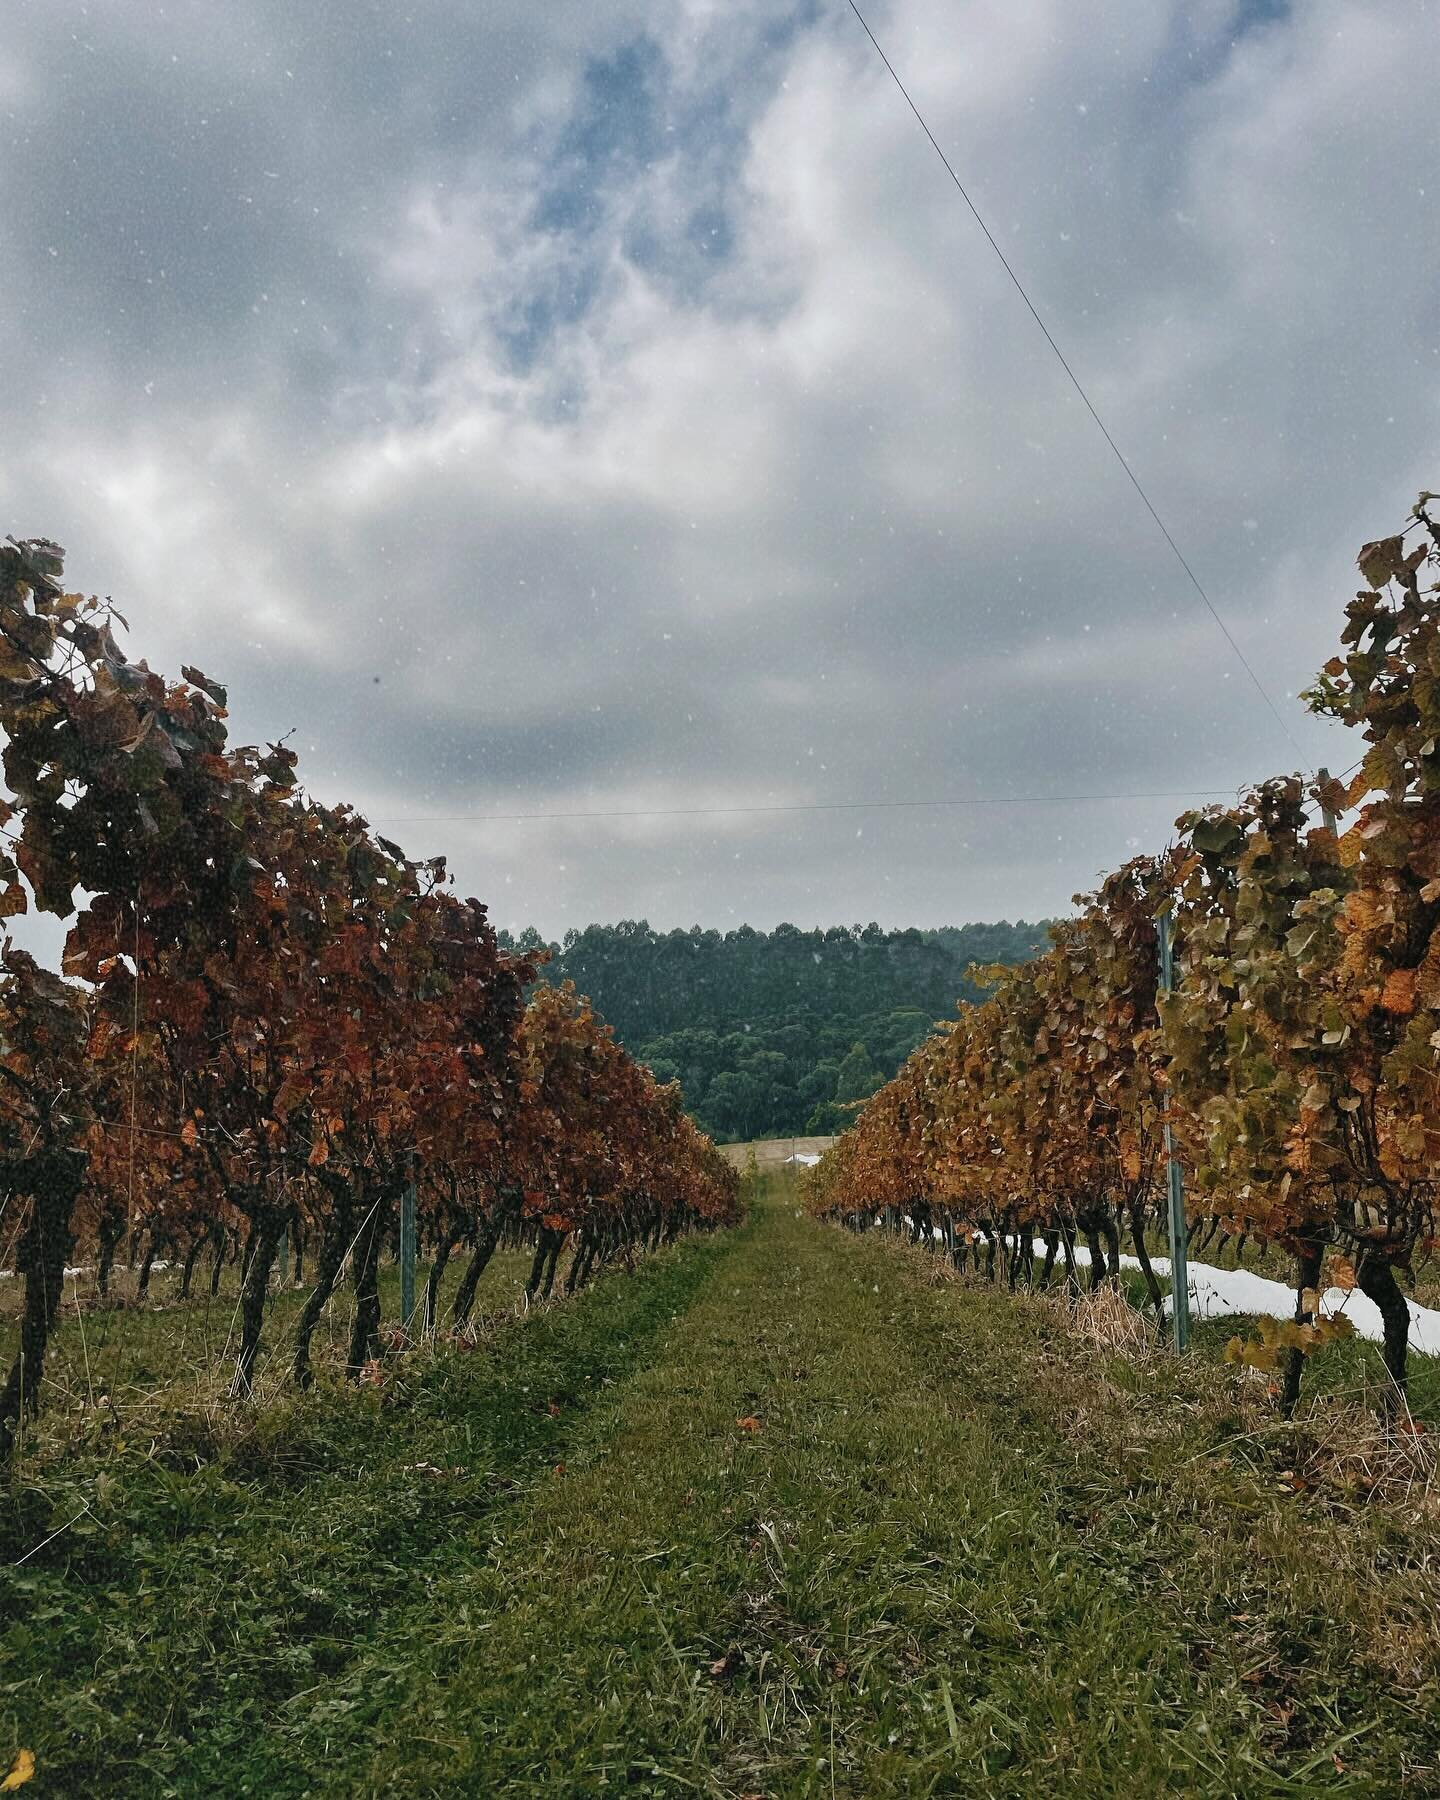 As the weather changes, so do our leaves: beautiful shades of orange have taken over our vineyard, offering us another reason to love what we do. 

If you&rsquo;re seeking shelter from the rains or just a pretty backdrop to ponder over, we&rsquo;re